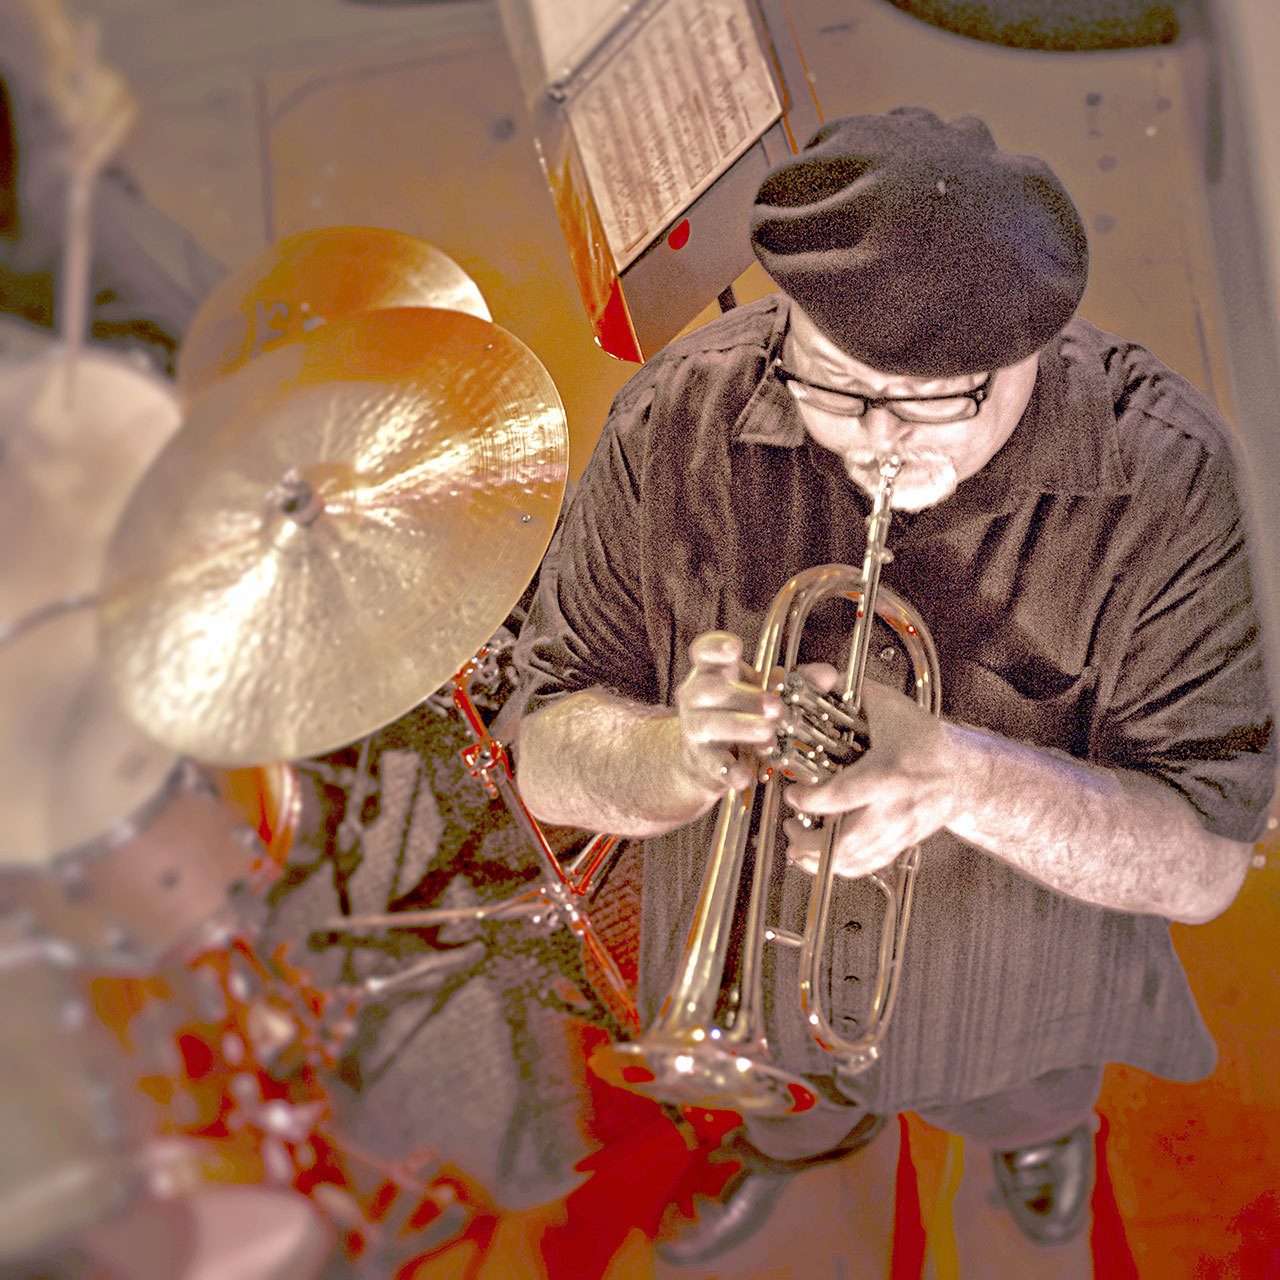 Jazz Noir comes to Port Townsend with performance by Dmitri Matheny and his quartet Saturday at The Cellar Door